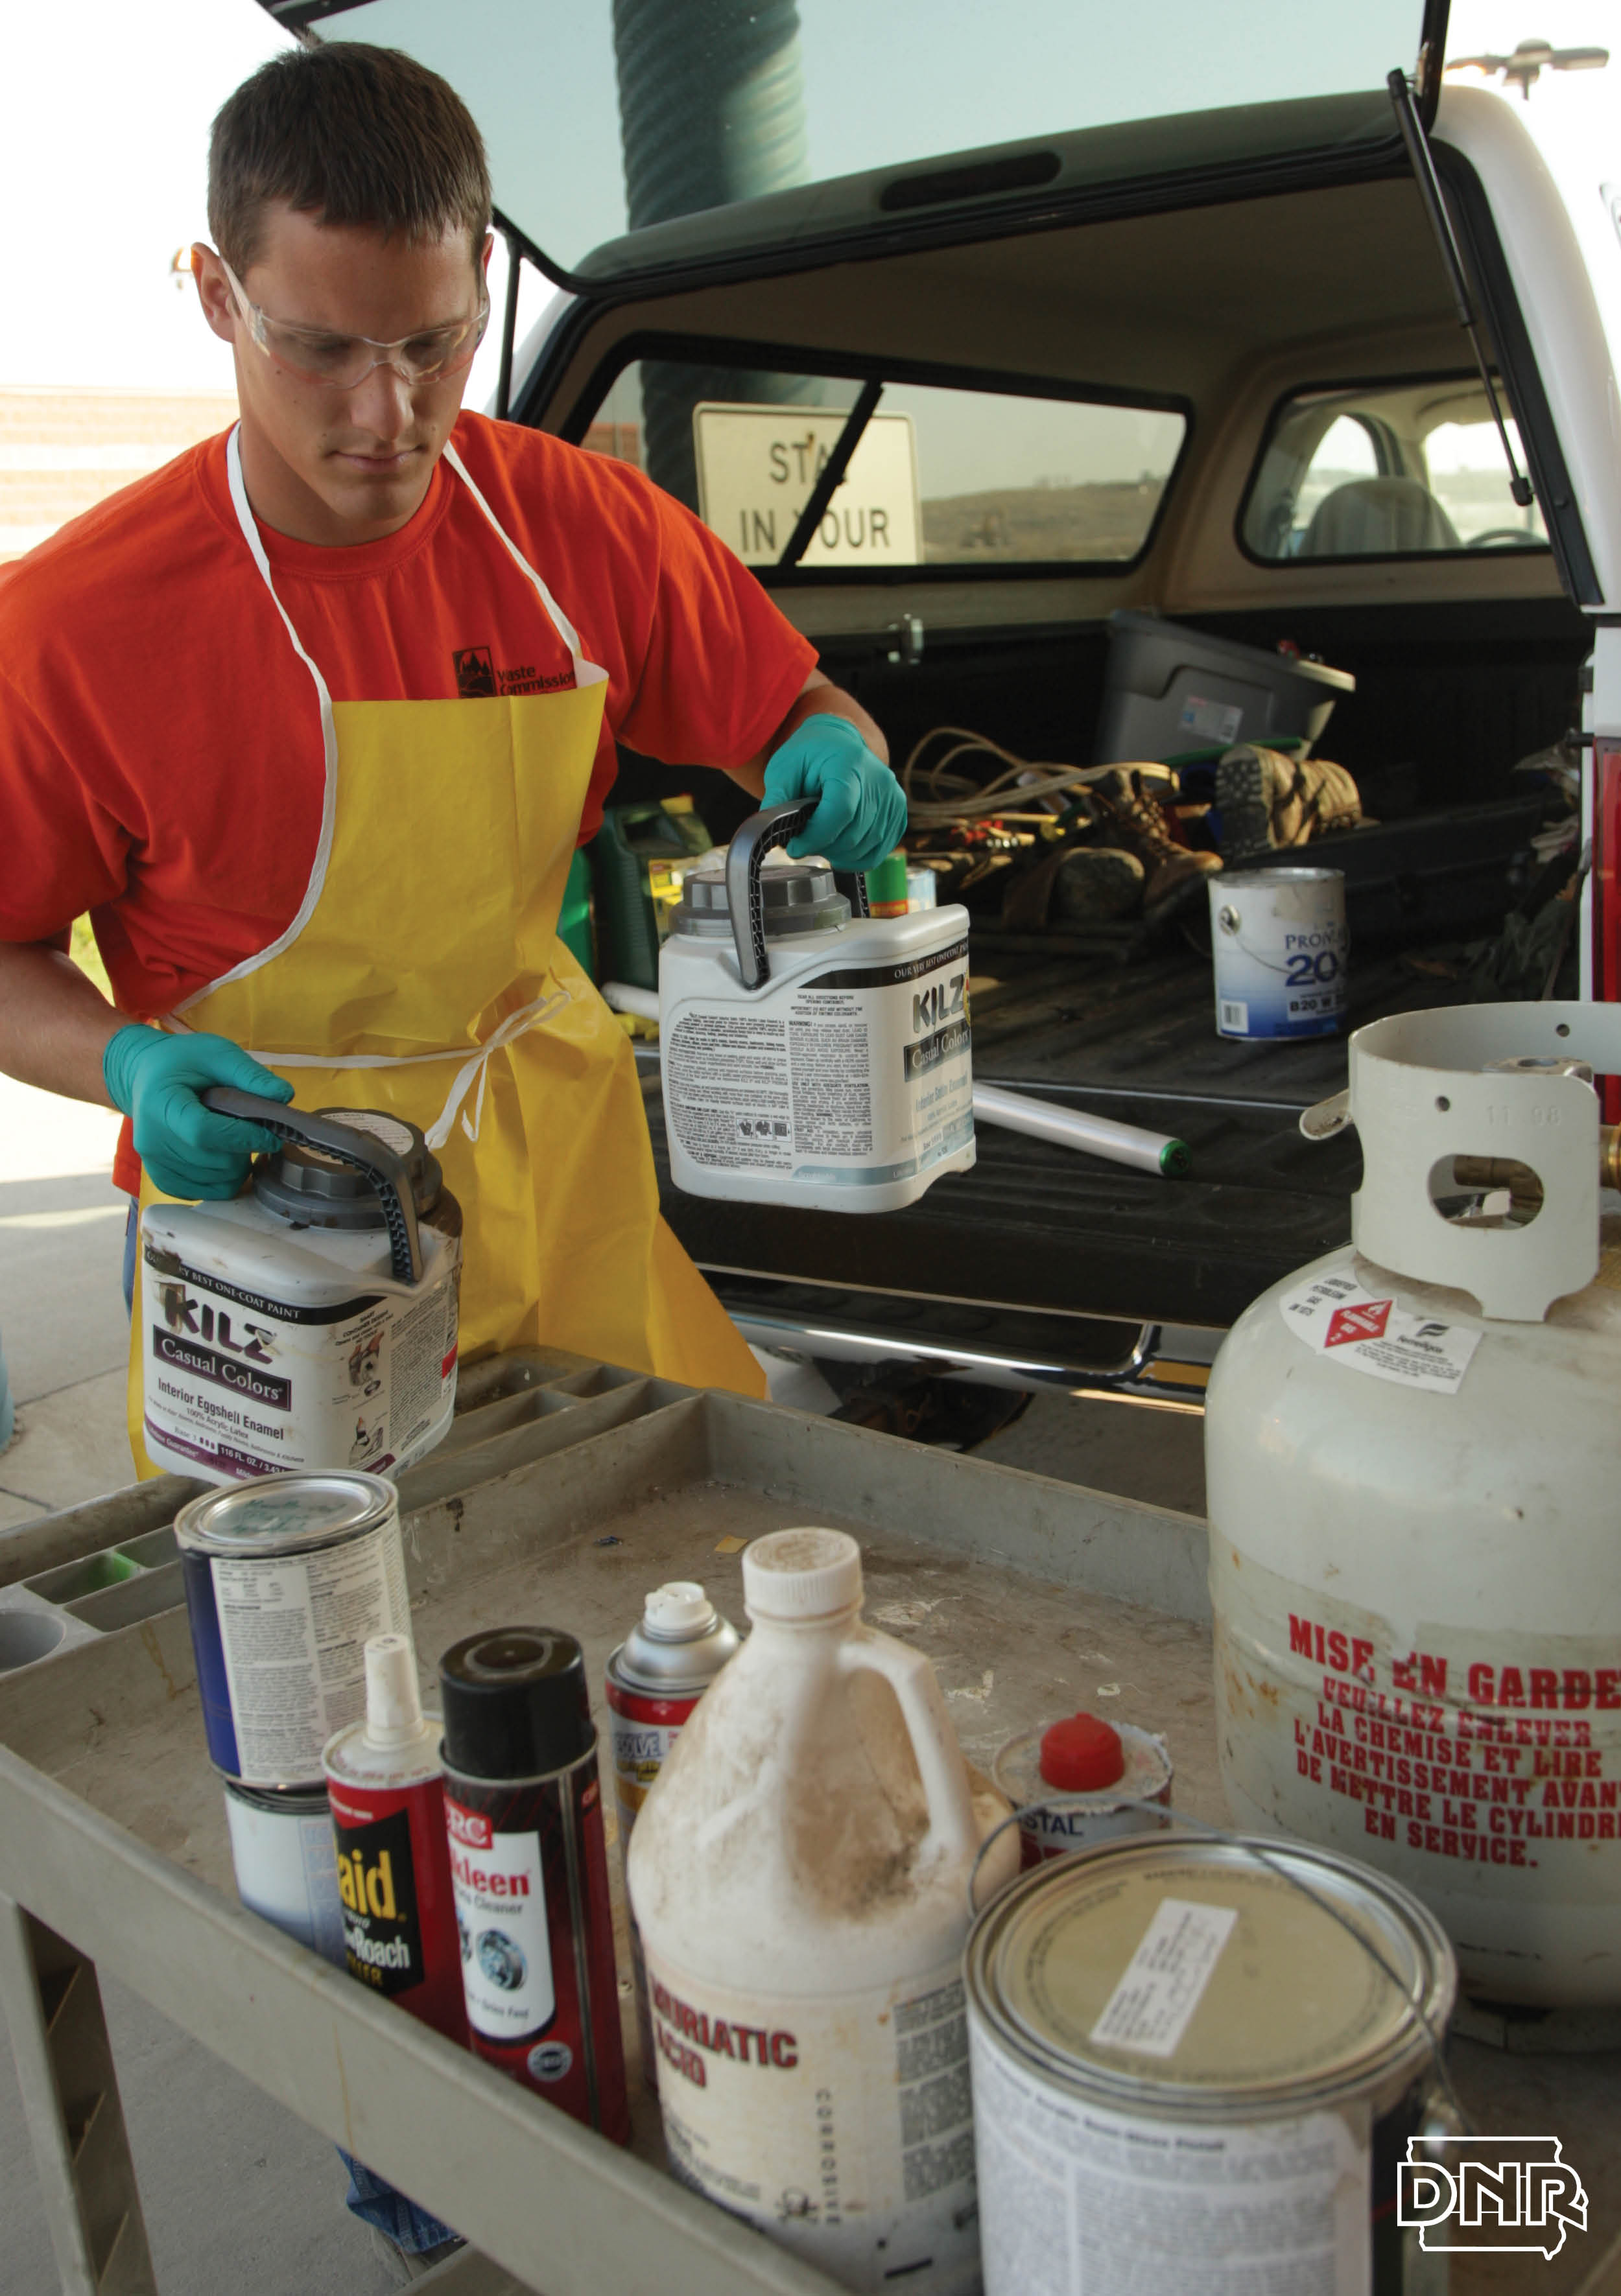 Know where to take your stuff when you clean out the garage and under the sink | Iowa DNR